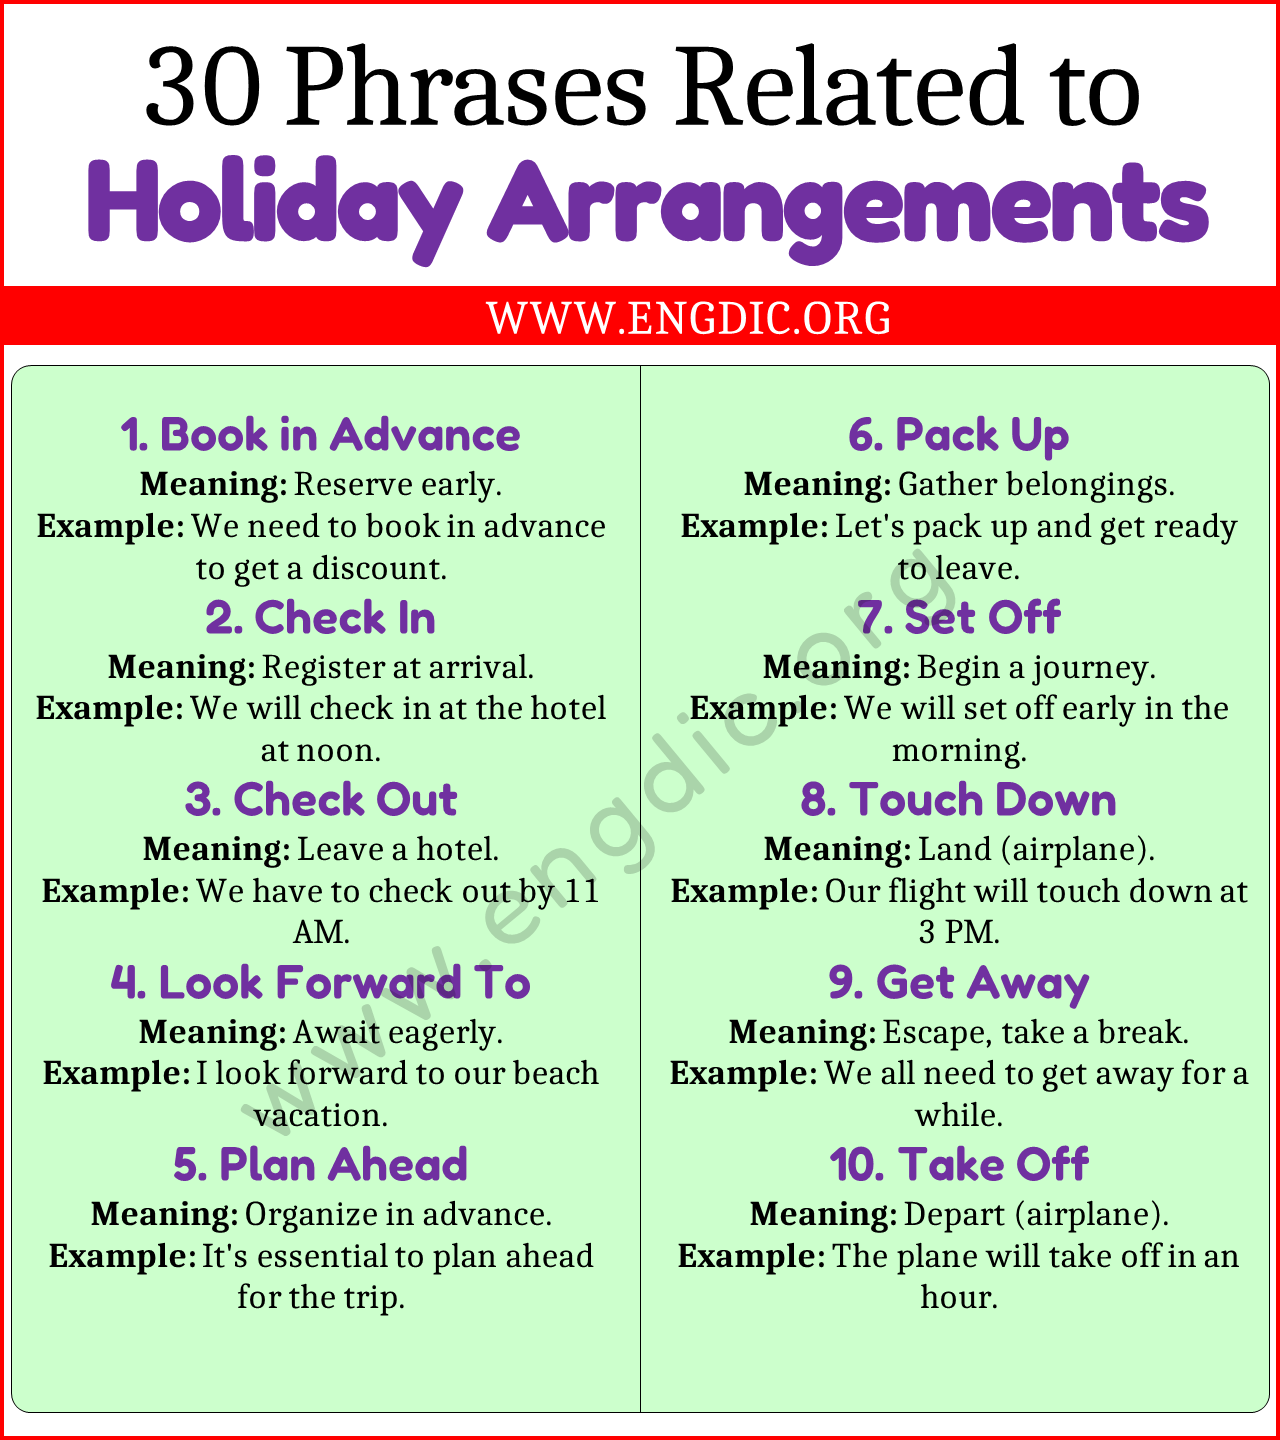 Phrases Related to Holiday Arrangements